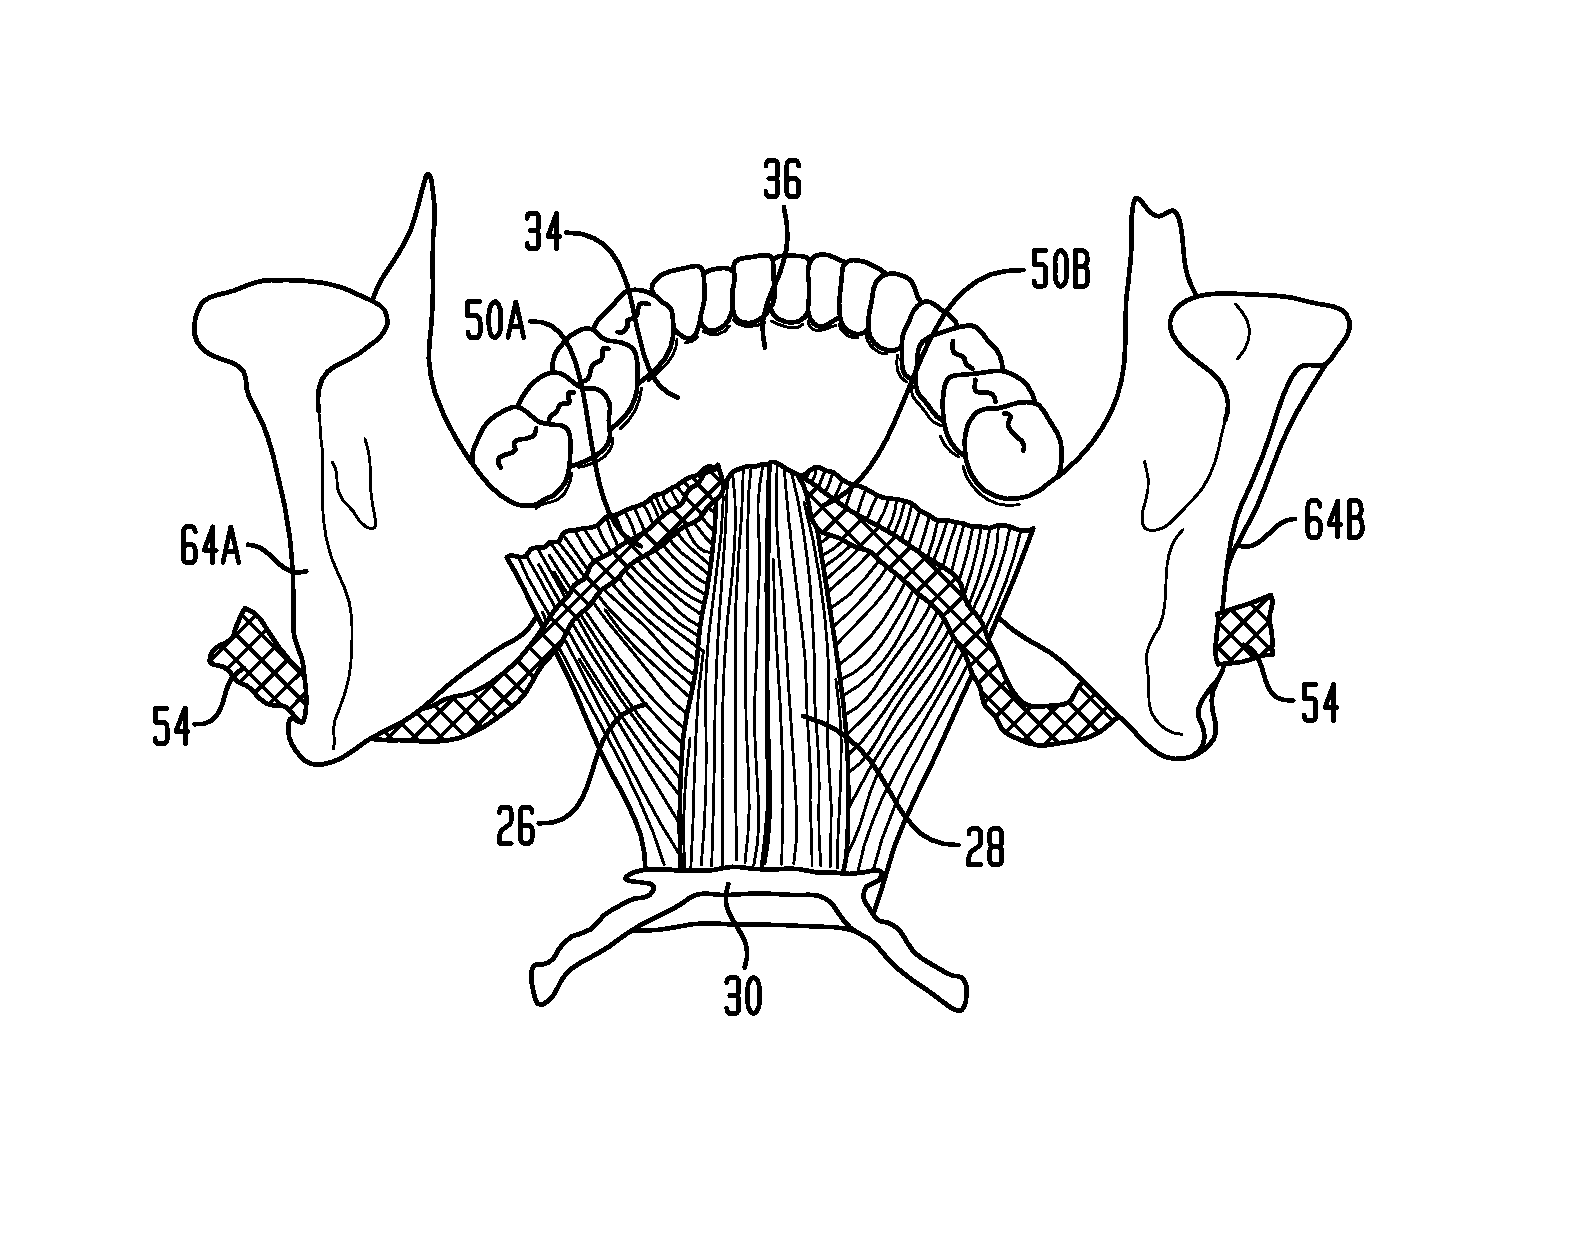 Methods and devices for the indirect displacement of the hyoid bone for treating obstructive sleep apnea